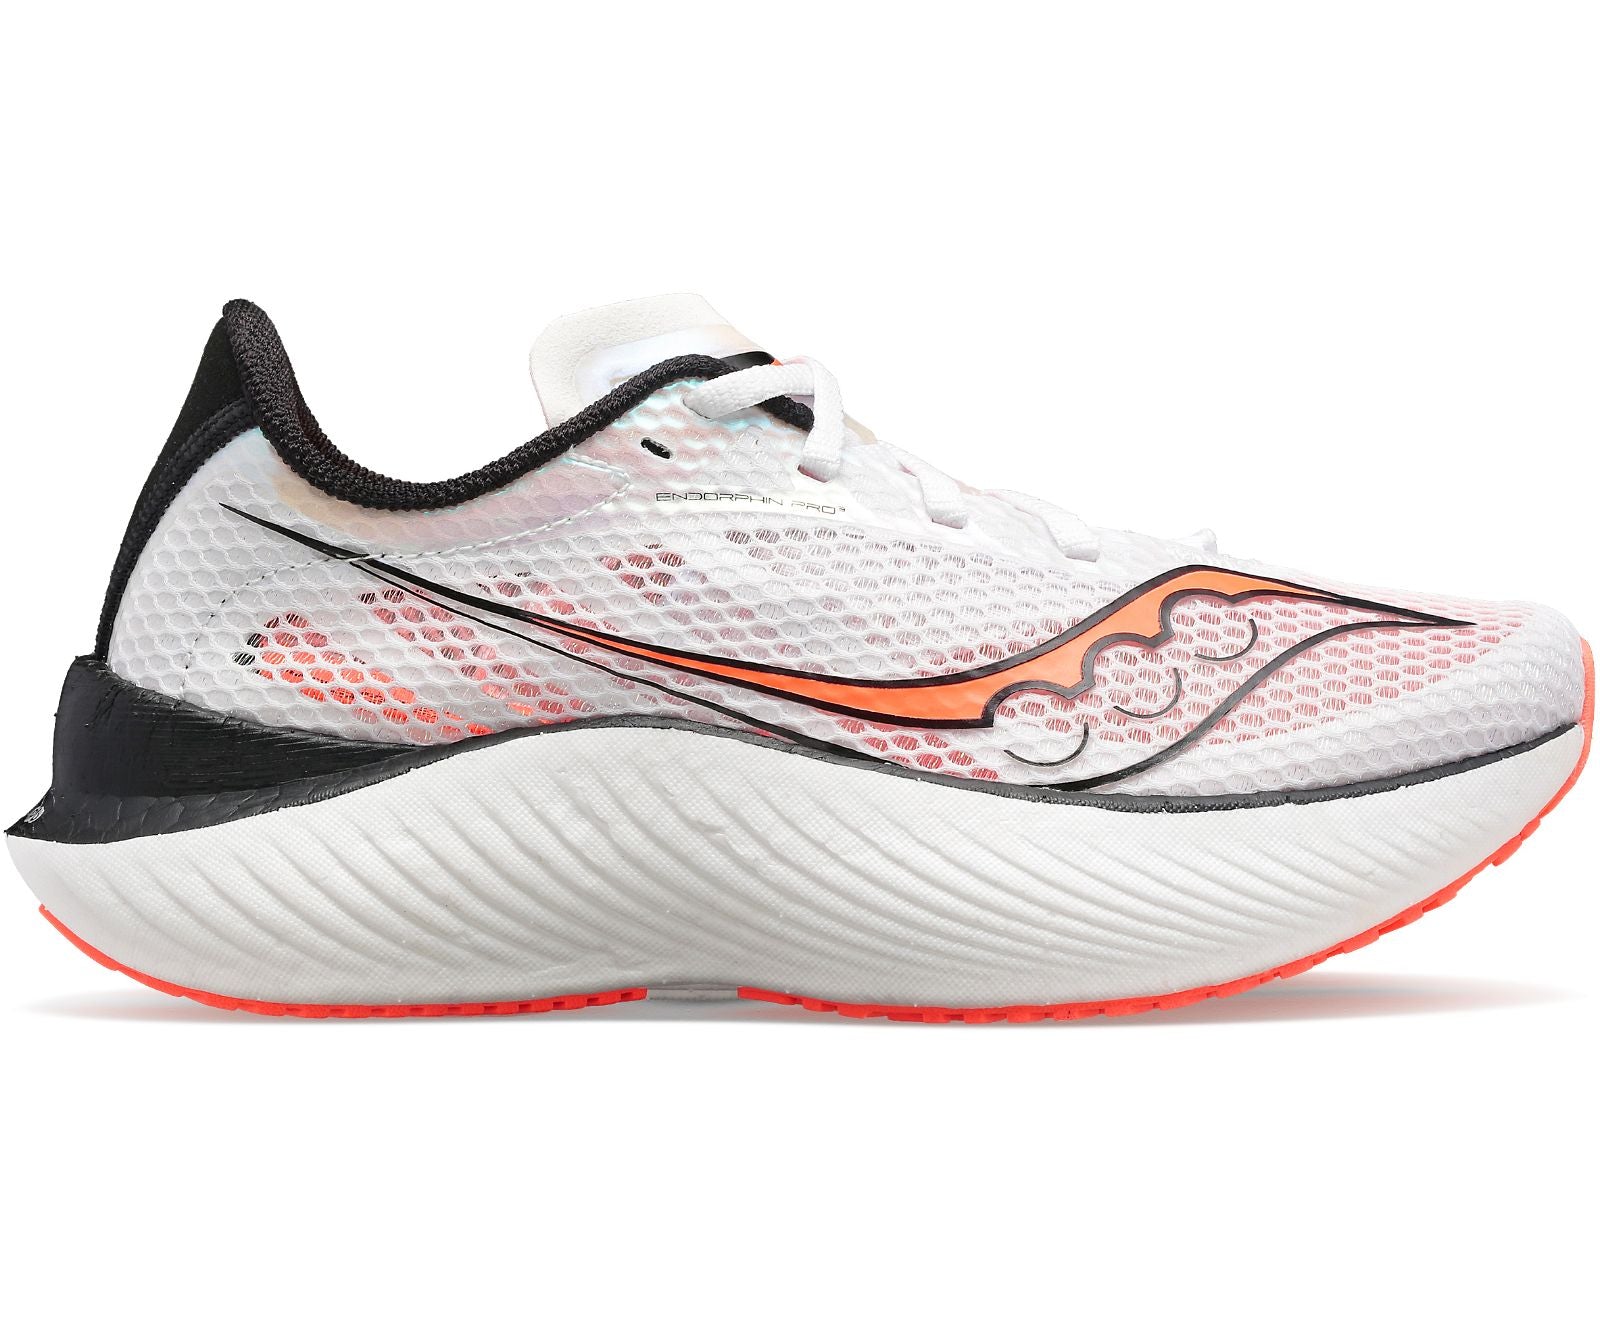 Lateral view of the Men's Endorphin Pro 3 by Saucony in the color White/Black/Vizired